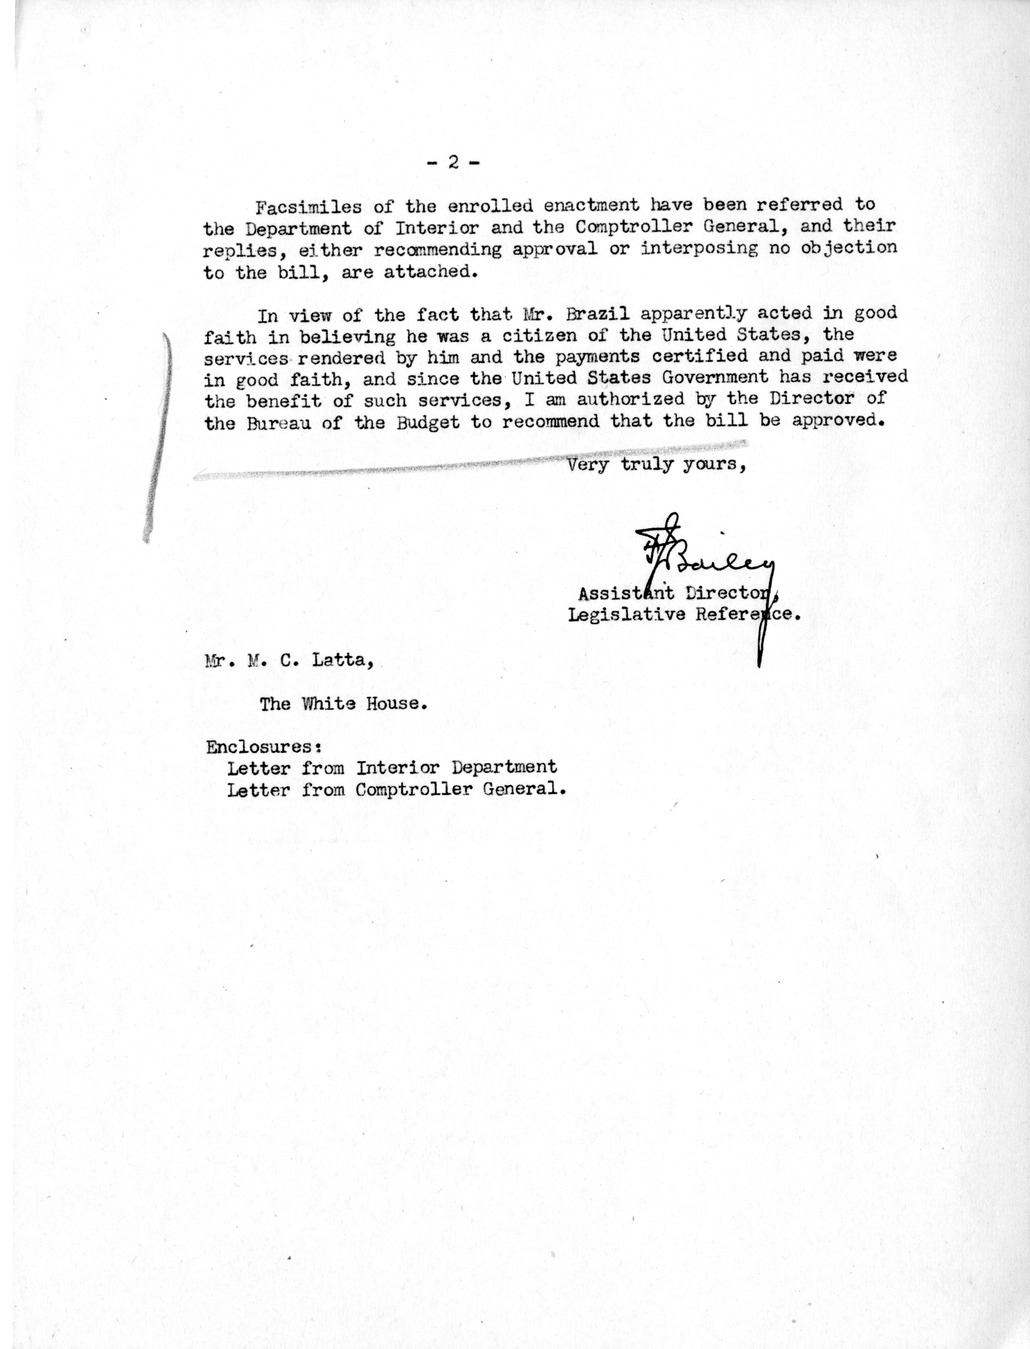 Memorandum from Frederick J. Bailey to M. C. Latta, S. 591, For the Relief of Chesley Brazil, with Attachments